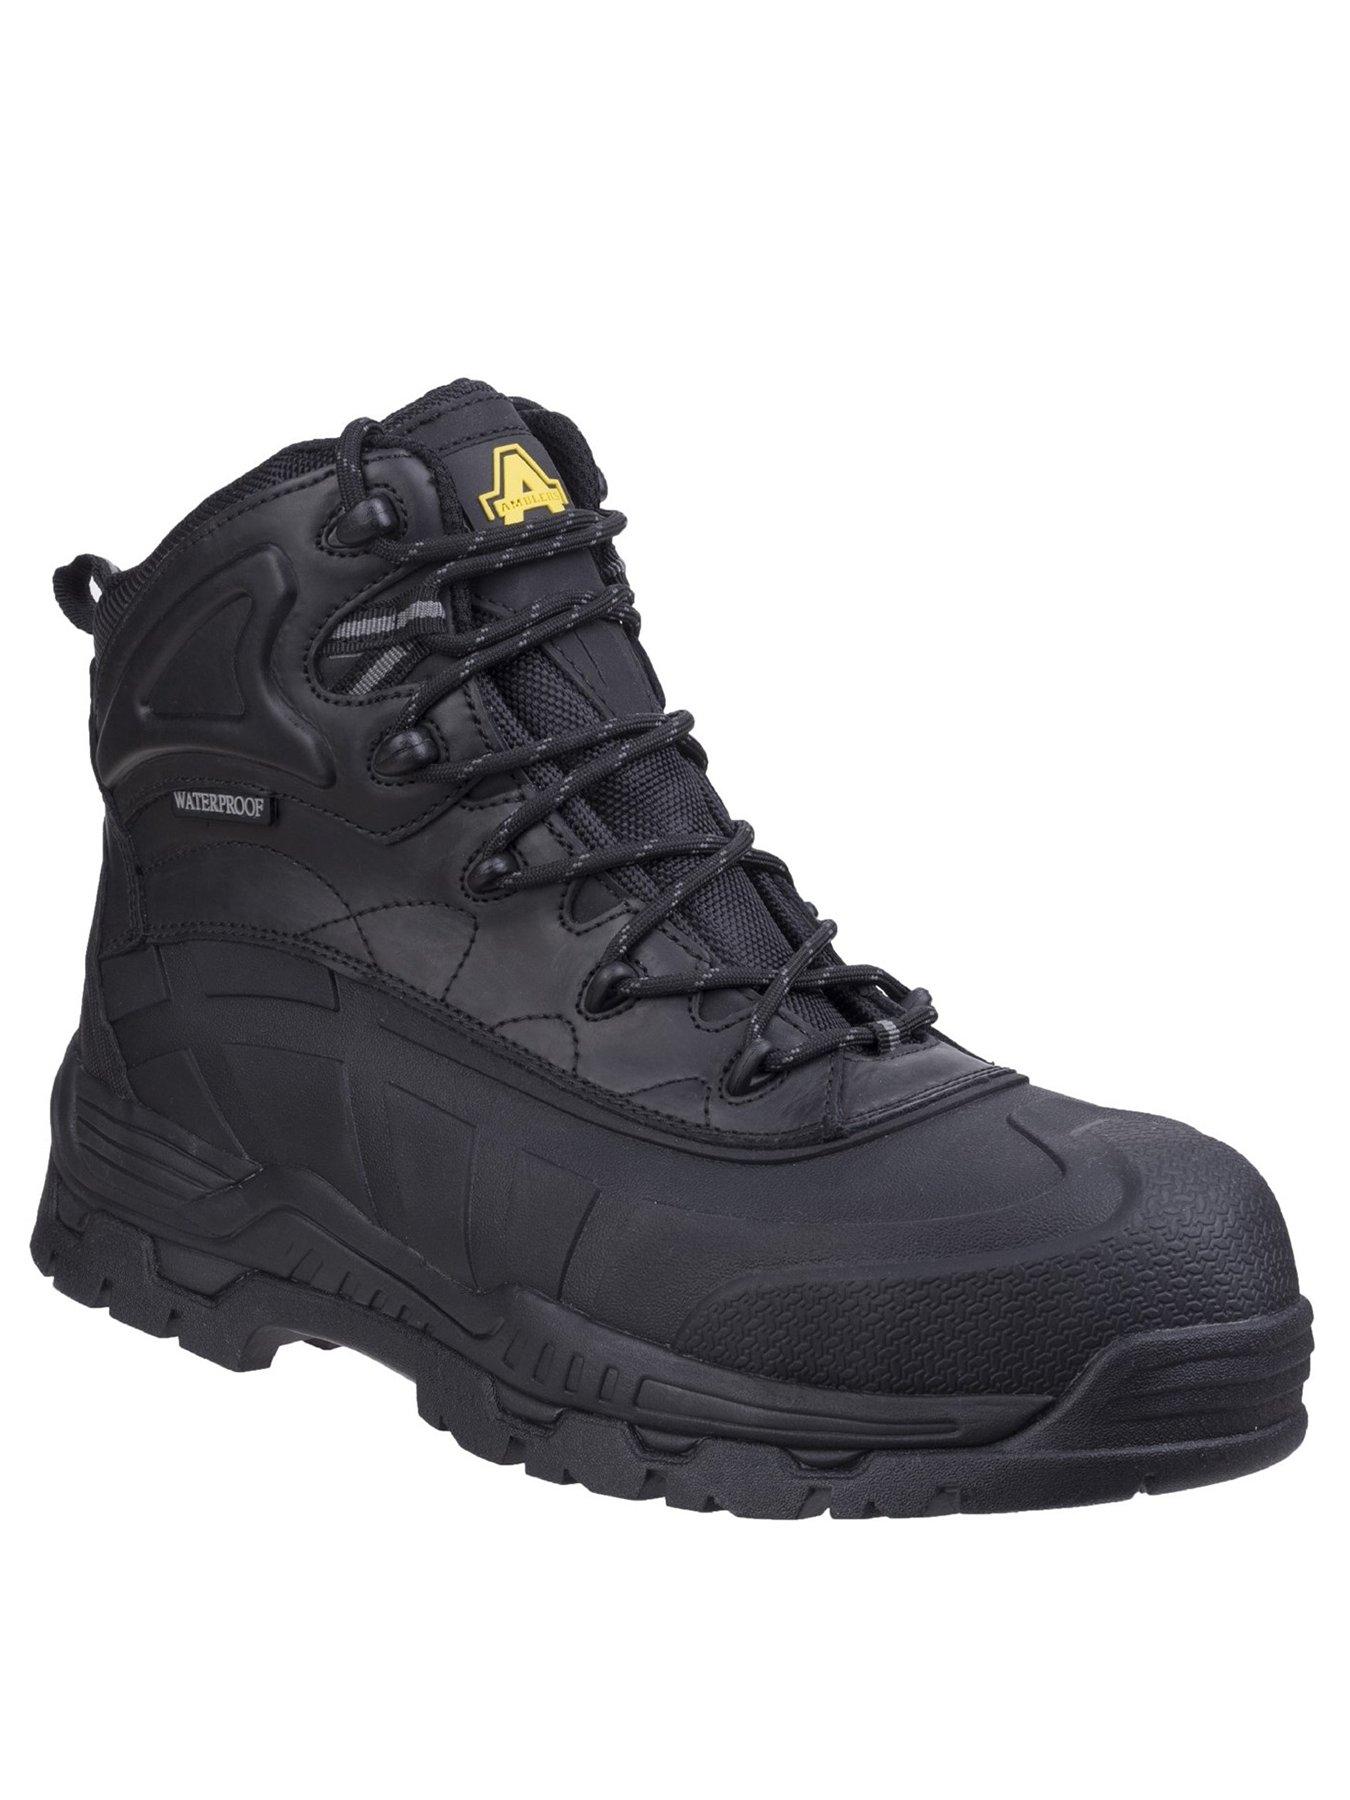 Details about   Men’s Safety Shoes Steel Toe Cap Work Boots Women Lightweight Safety Trainers UK 